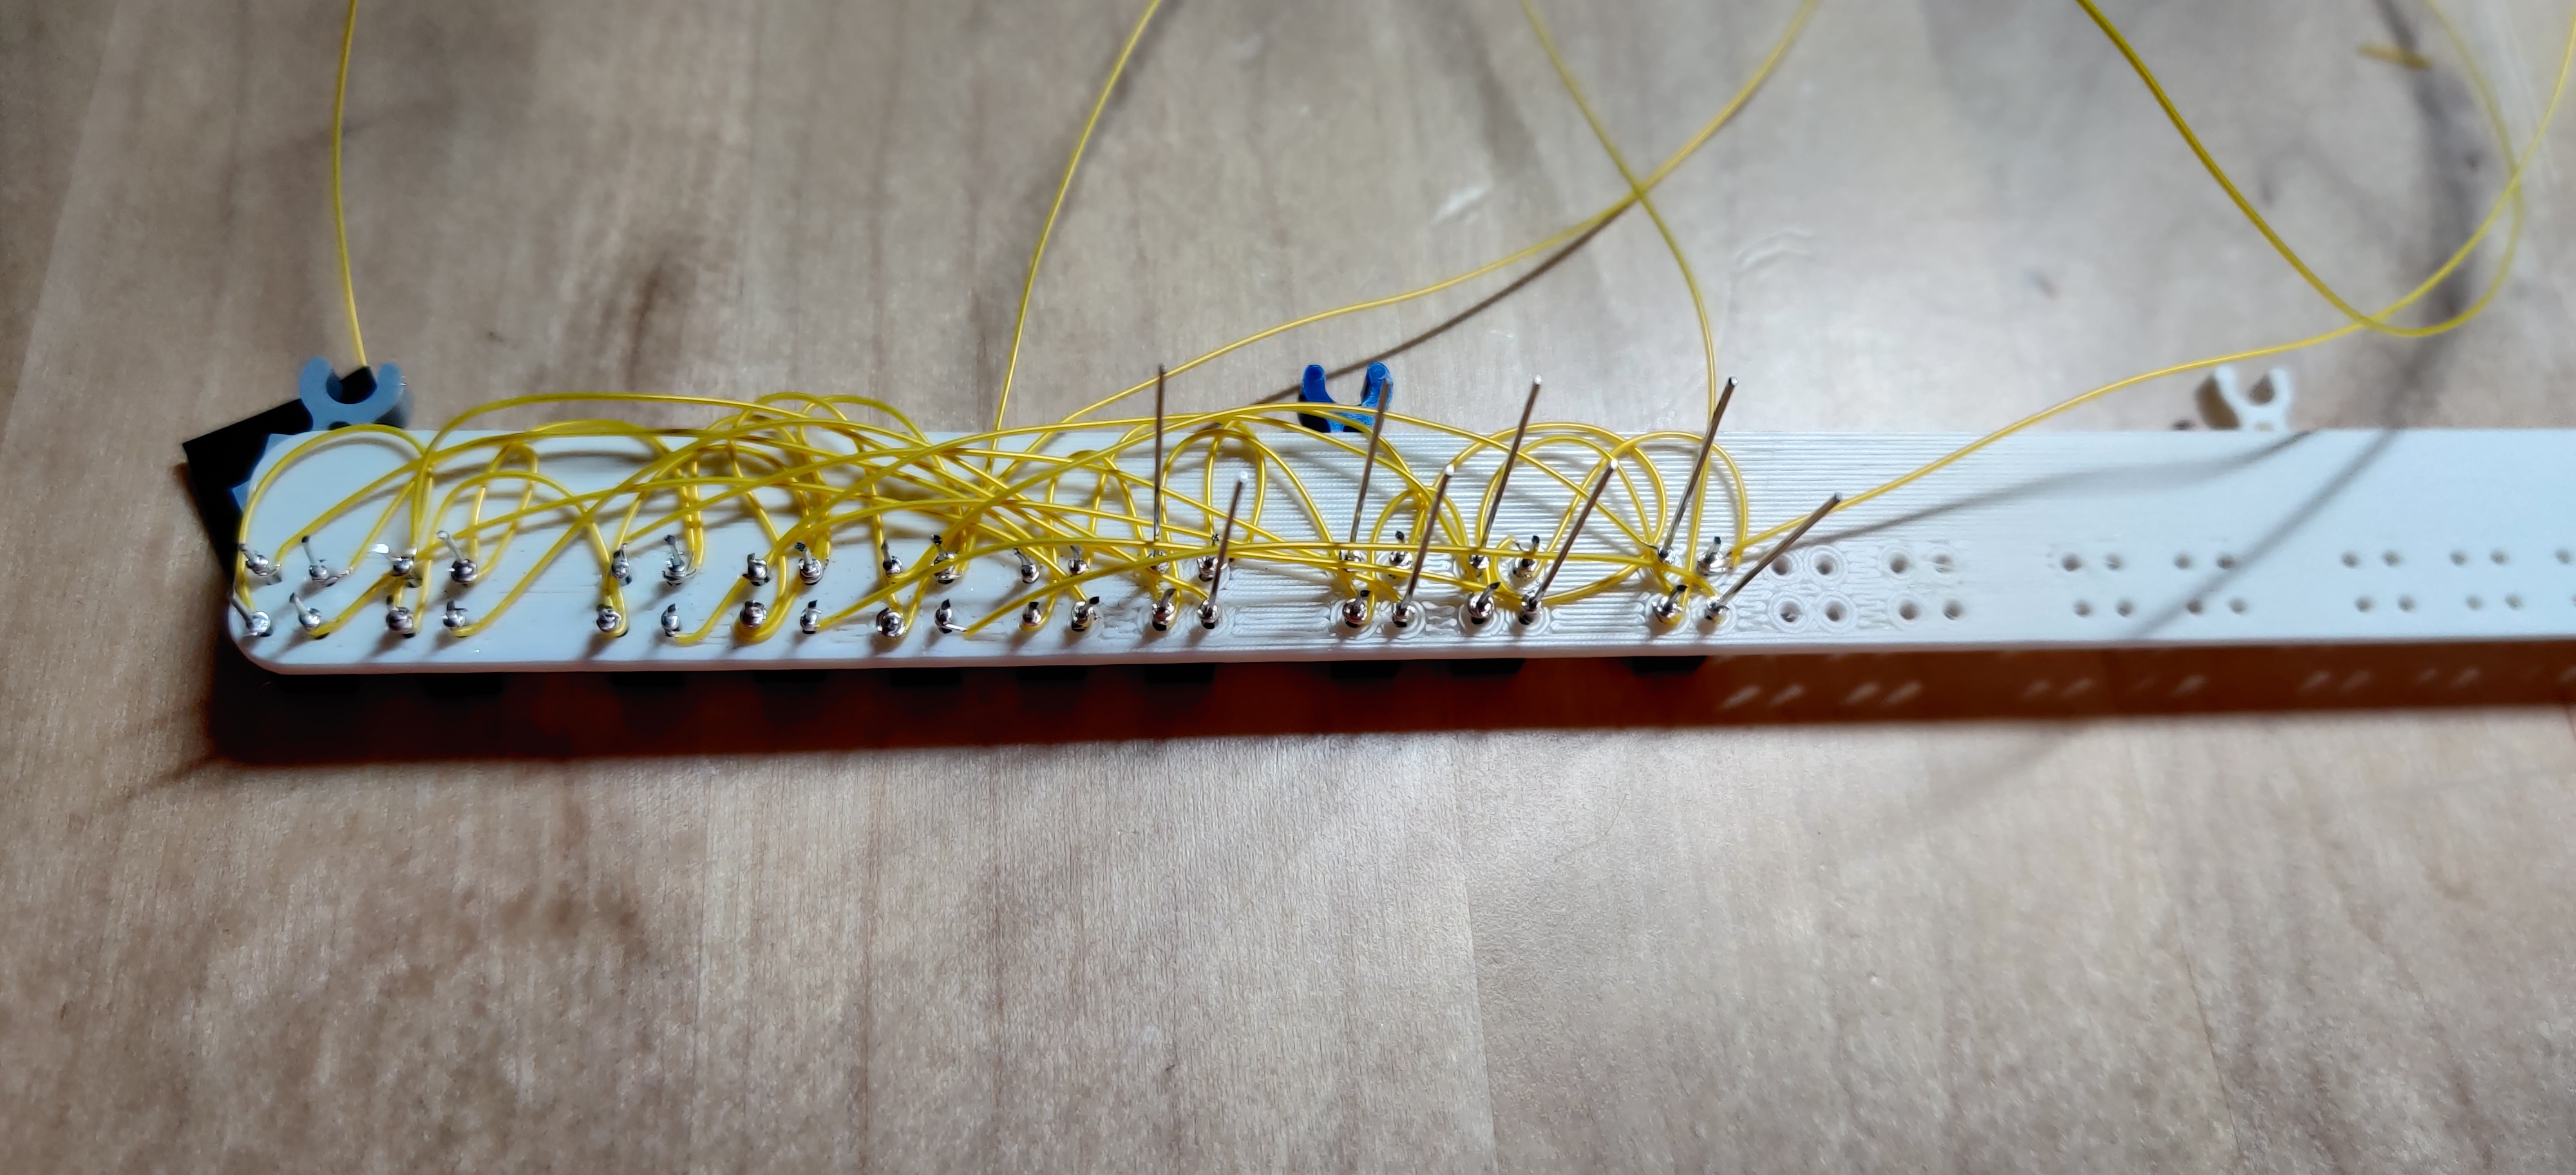 reverse side of the 29×2 rectangle, with 10 sensors inserted
into their holes from the front, and many thin electrical
wires, insulated in yellow plastic, connecting some of their
pins